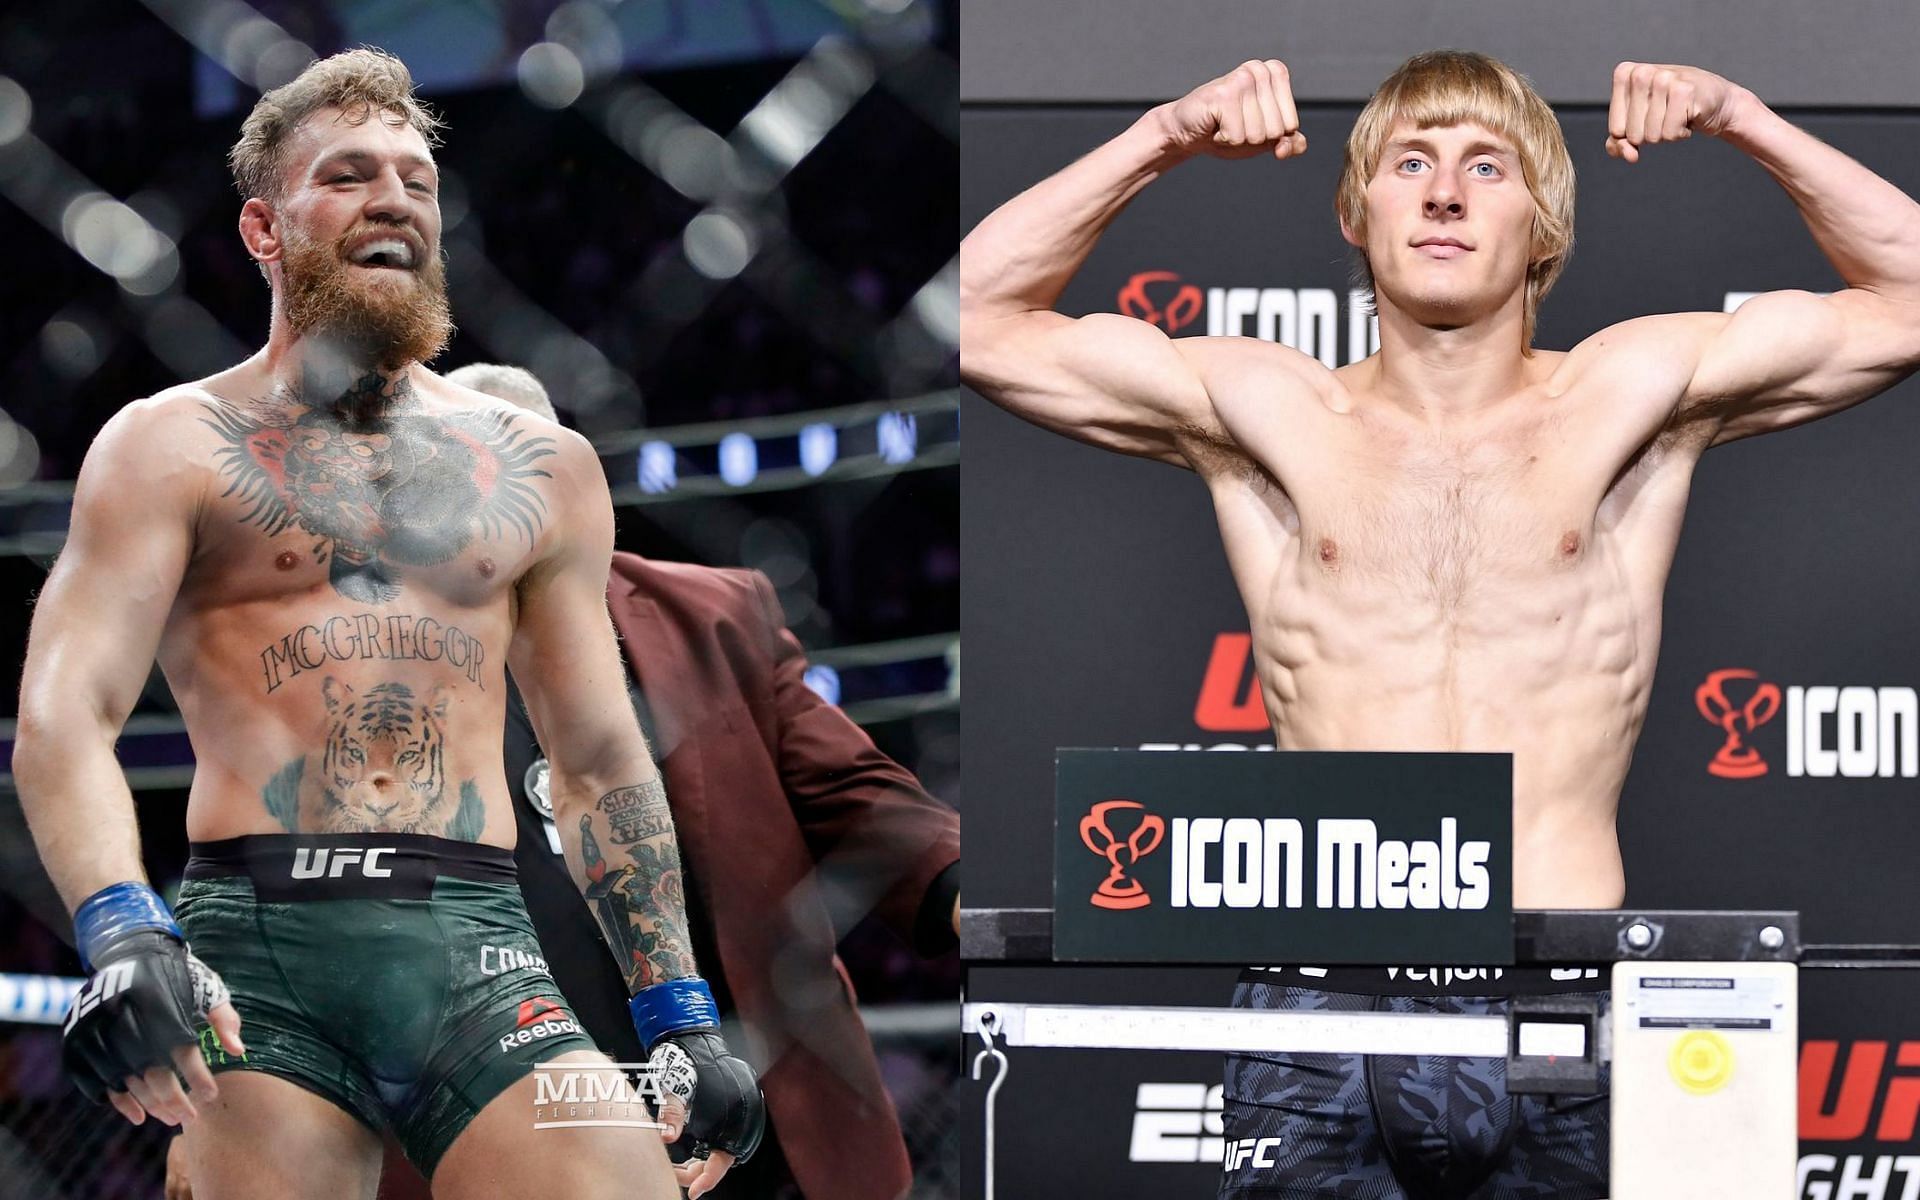 “I’ll never say no to nothing” – Conor McGregor is open to fighting Paddy Pimblett in the future